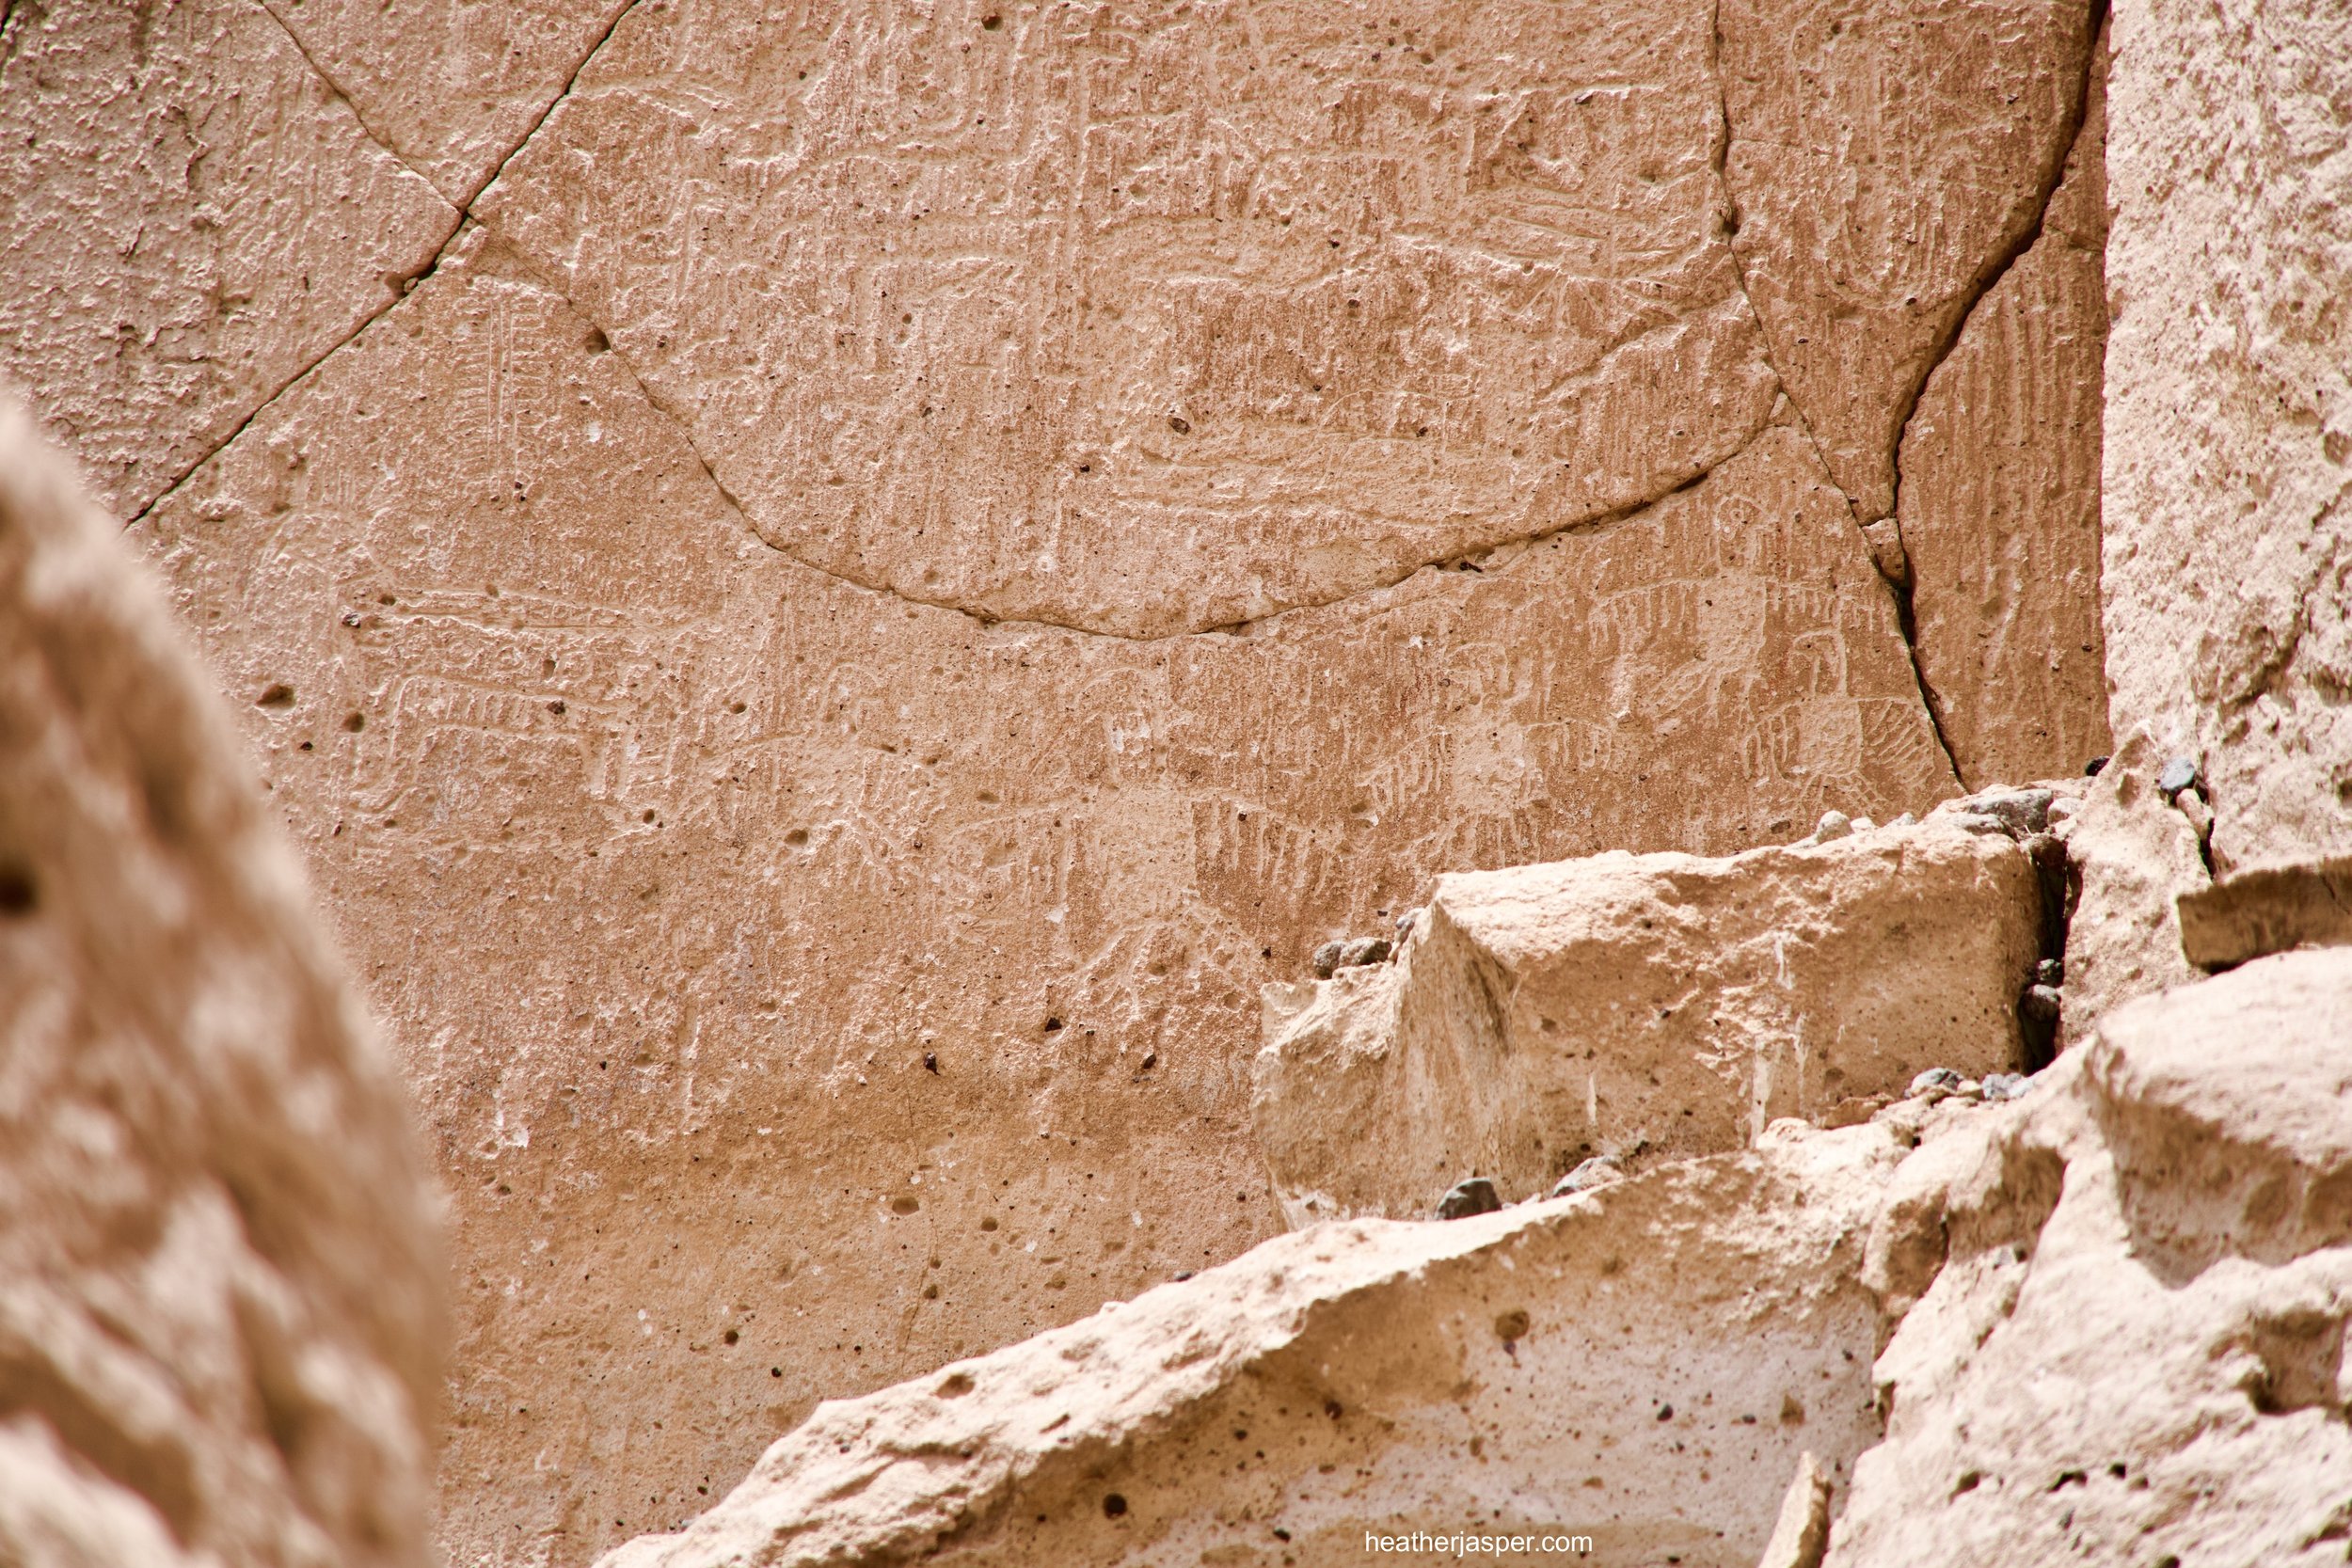 In the canyon there are several walls with petroglyphs.